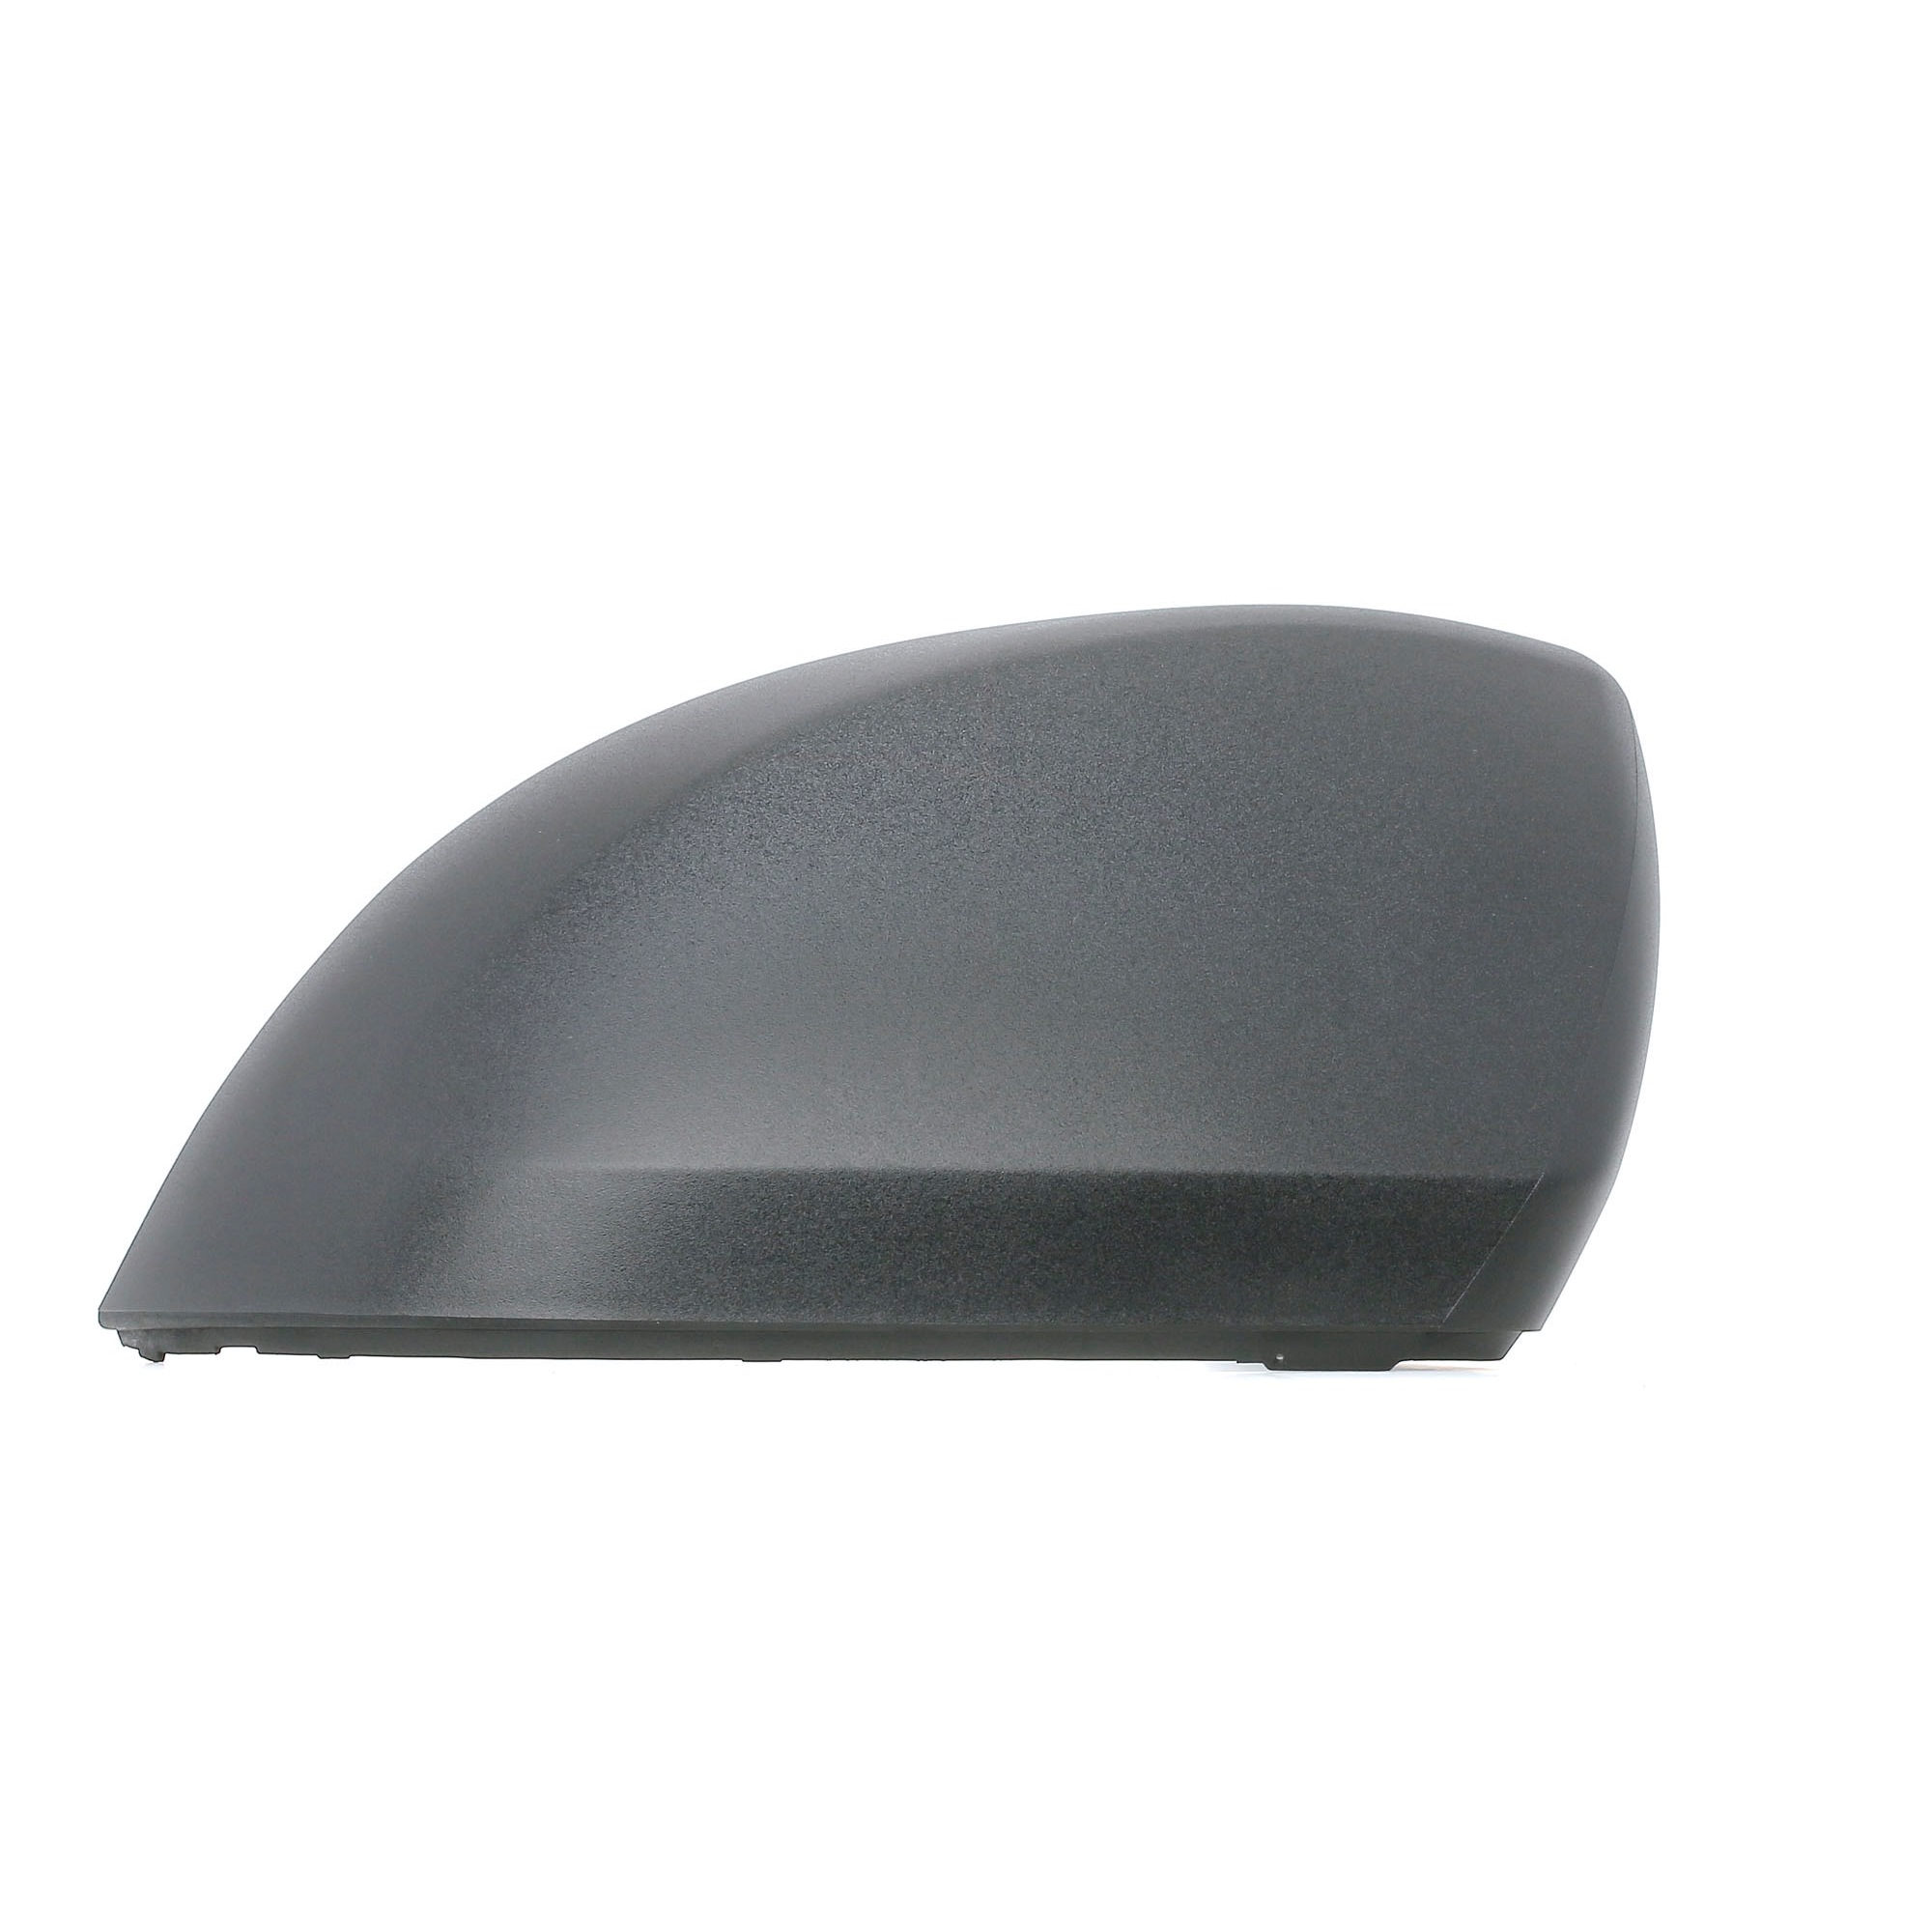 BLIC Wing mirror covers left and right Mercedes W213 new 6103-01-0203891P